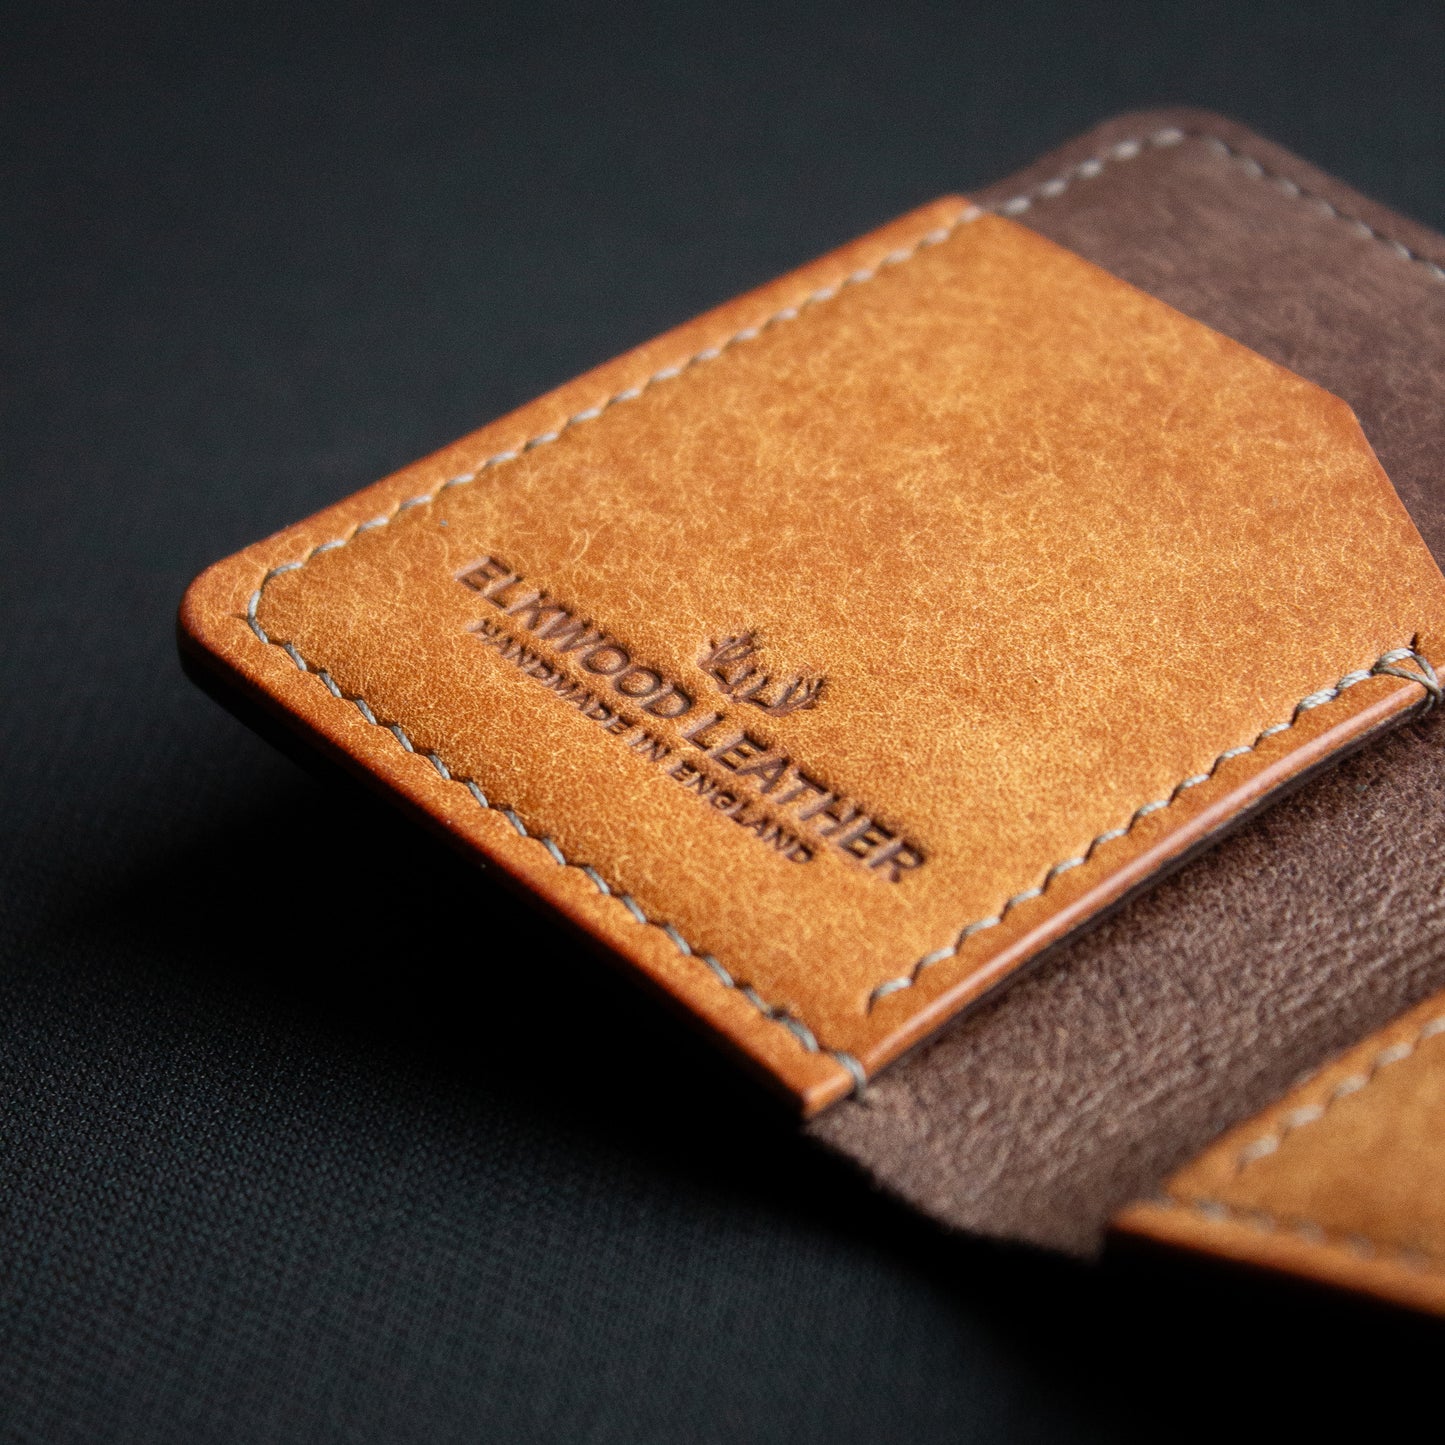 PDF TEMPLATE - handcrafted brown leather wallet ontop of black background - open leather cardholder - Badalassi Carlo Pueblo Cognac and Castagno leather - close up saddle stich with grey xiange thread and pocket with elkwood leather logo